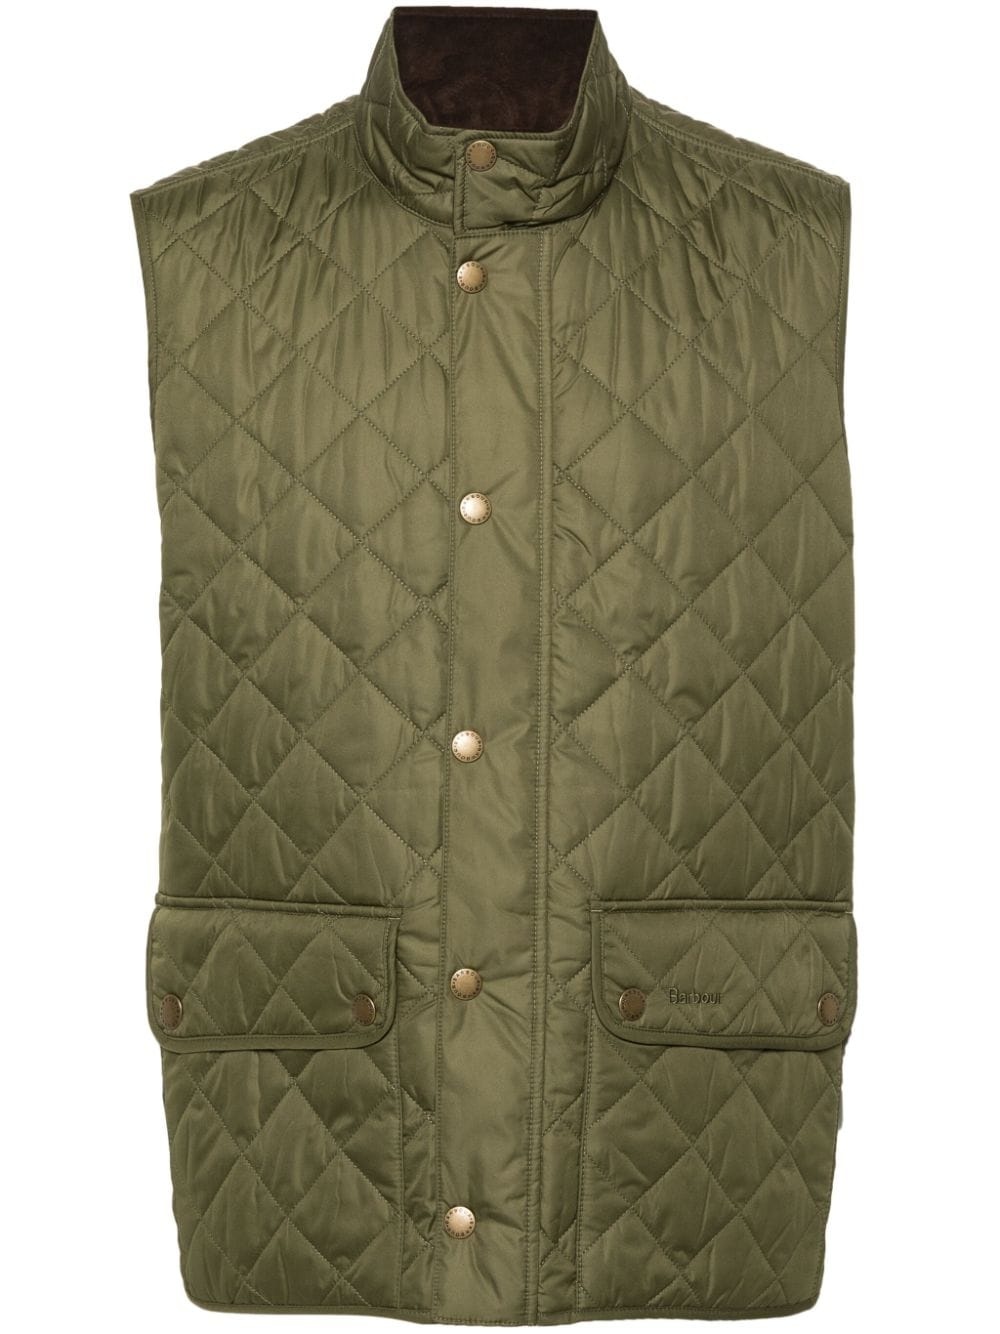 Lowerdale quilted vest - 1